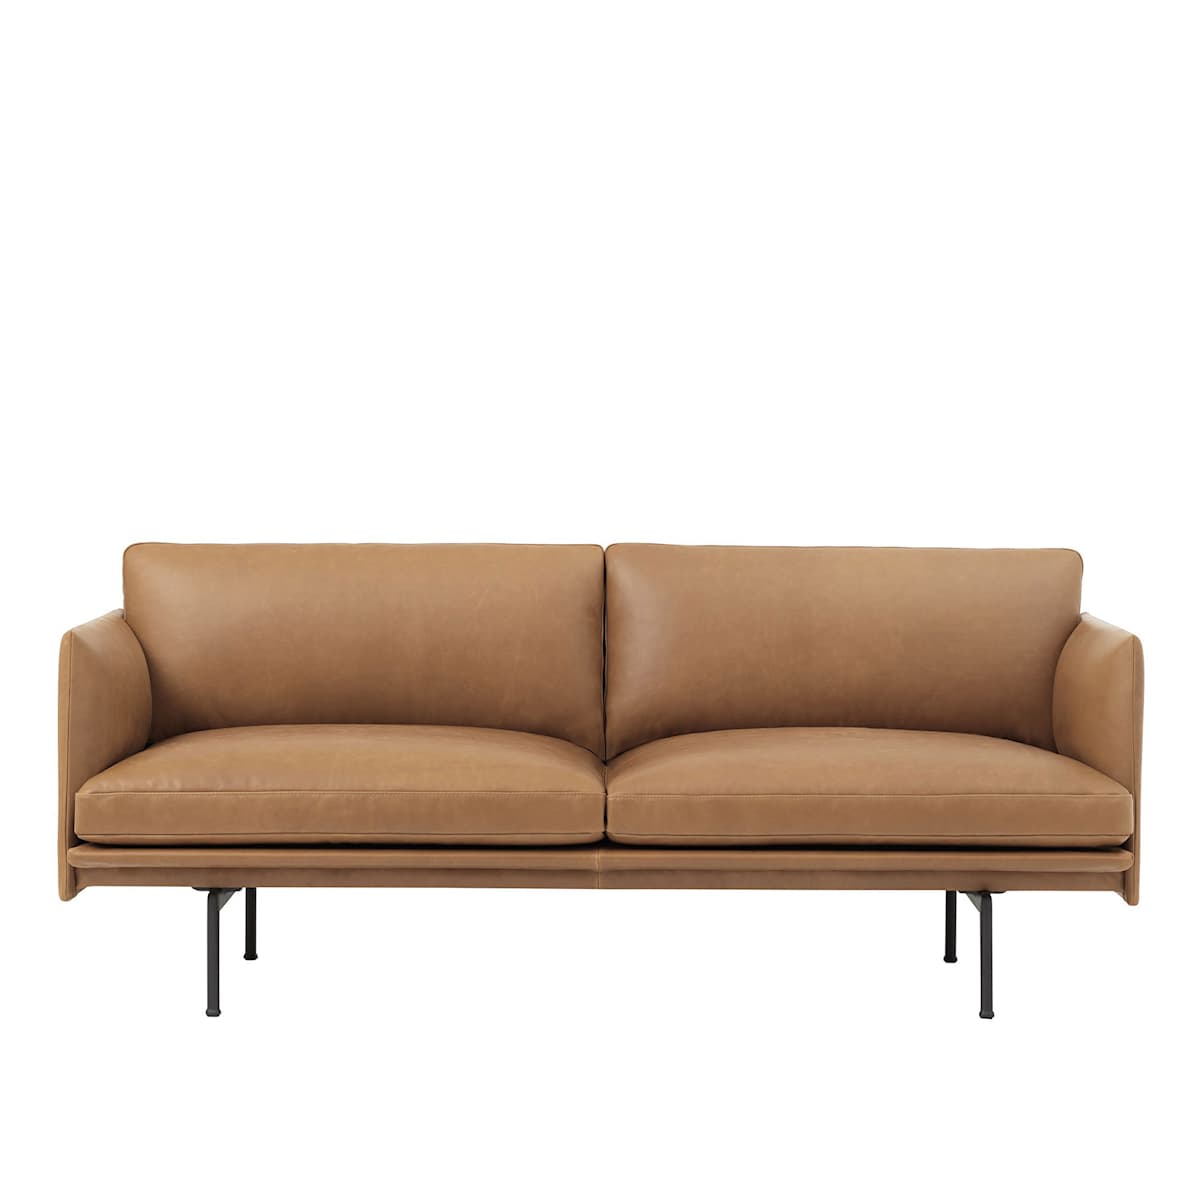 Outline Sofa 2-seater